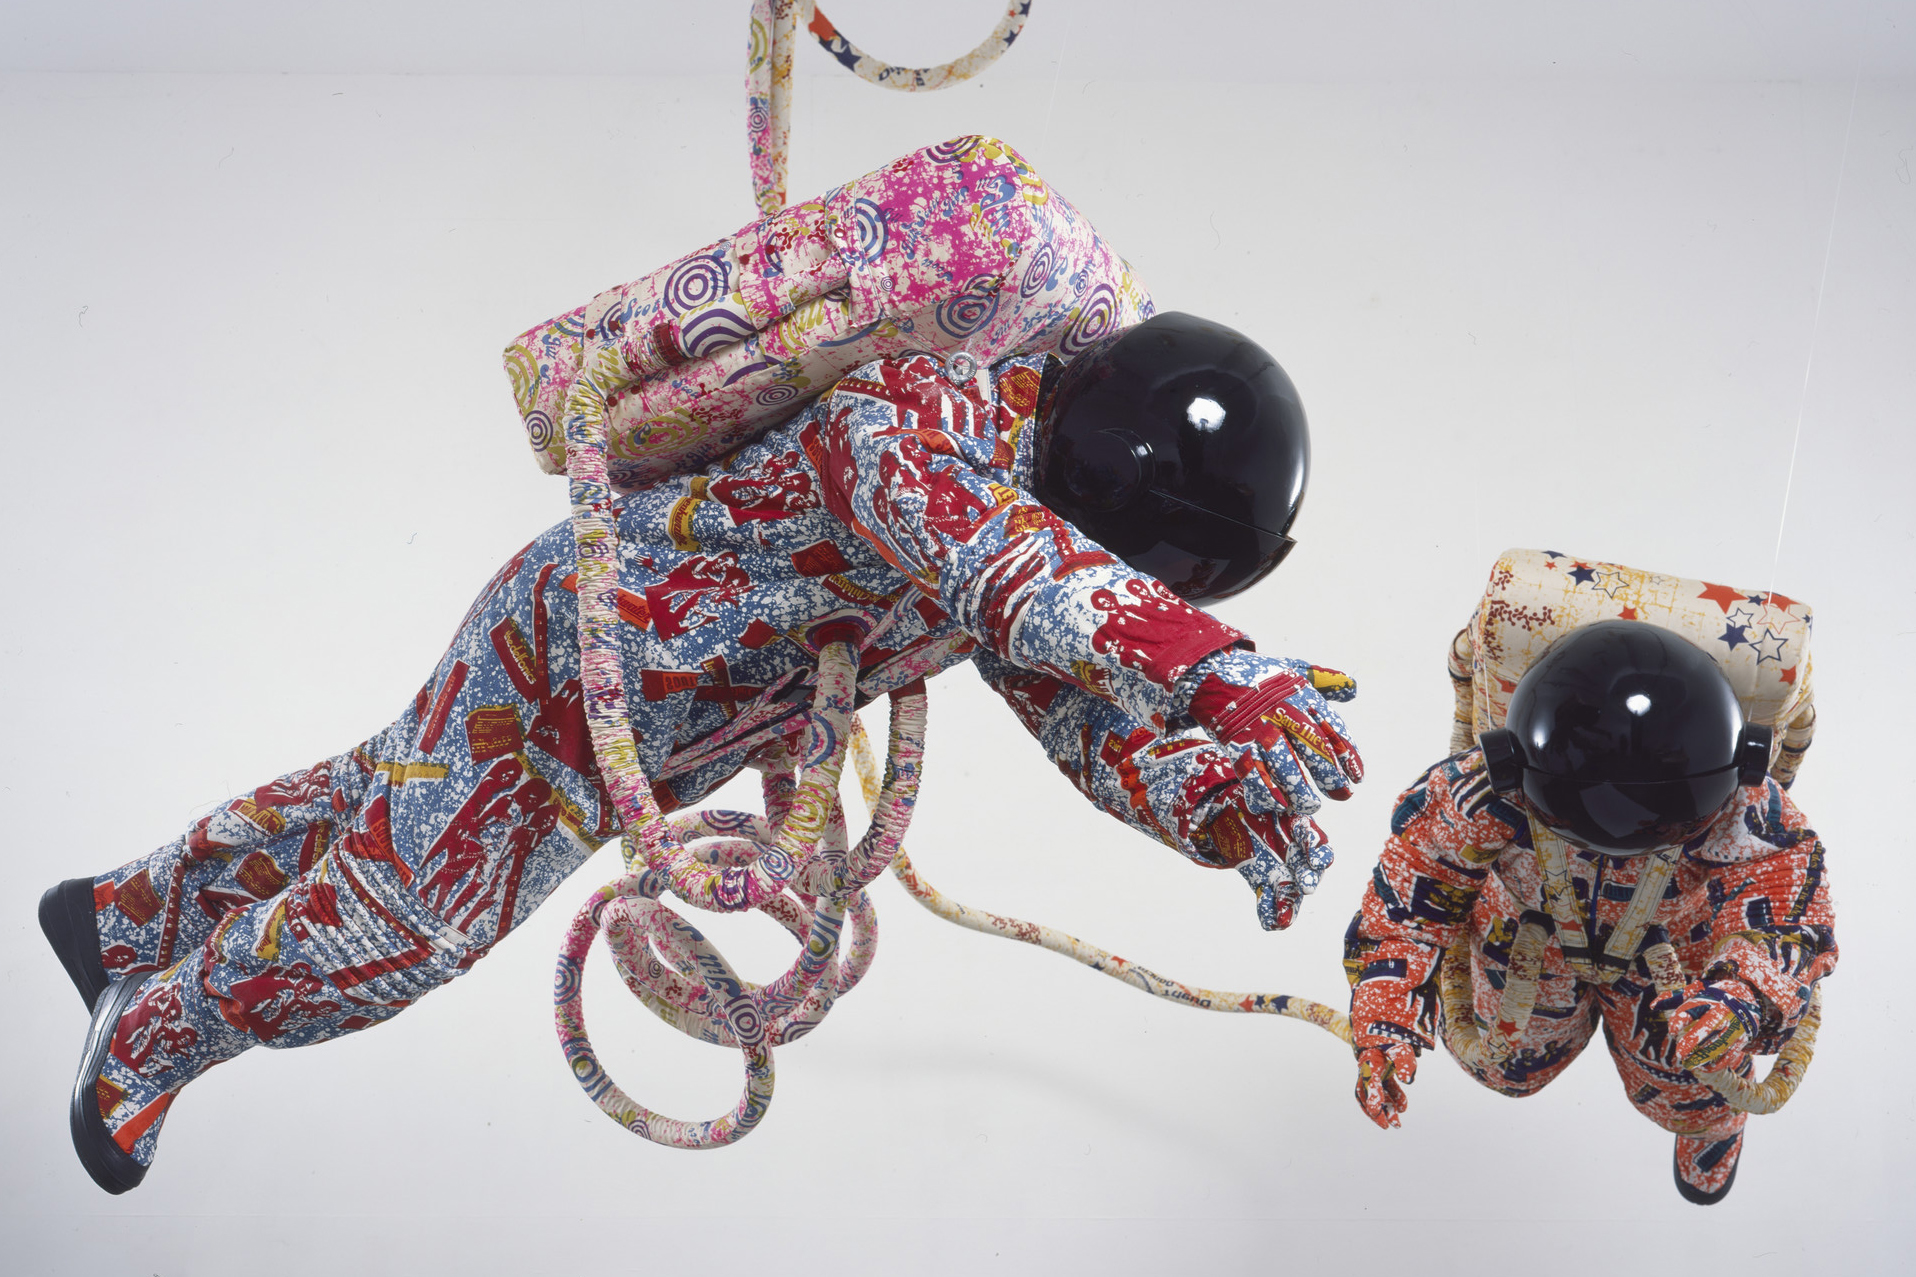 Yinka Shonibare, in collaboration with The Fabric Workshop and Museum, Space Walk, 2002.